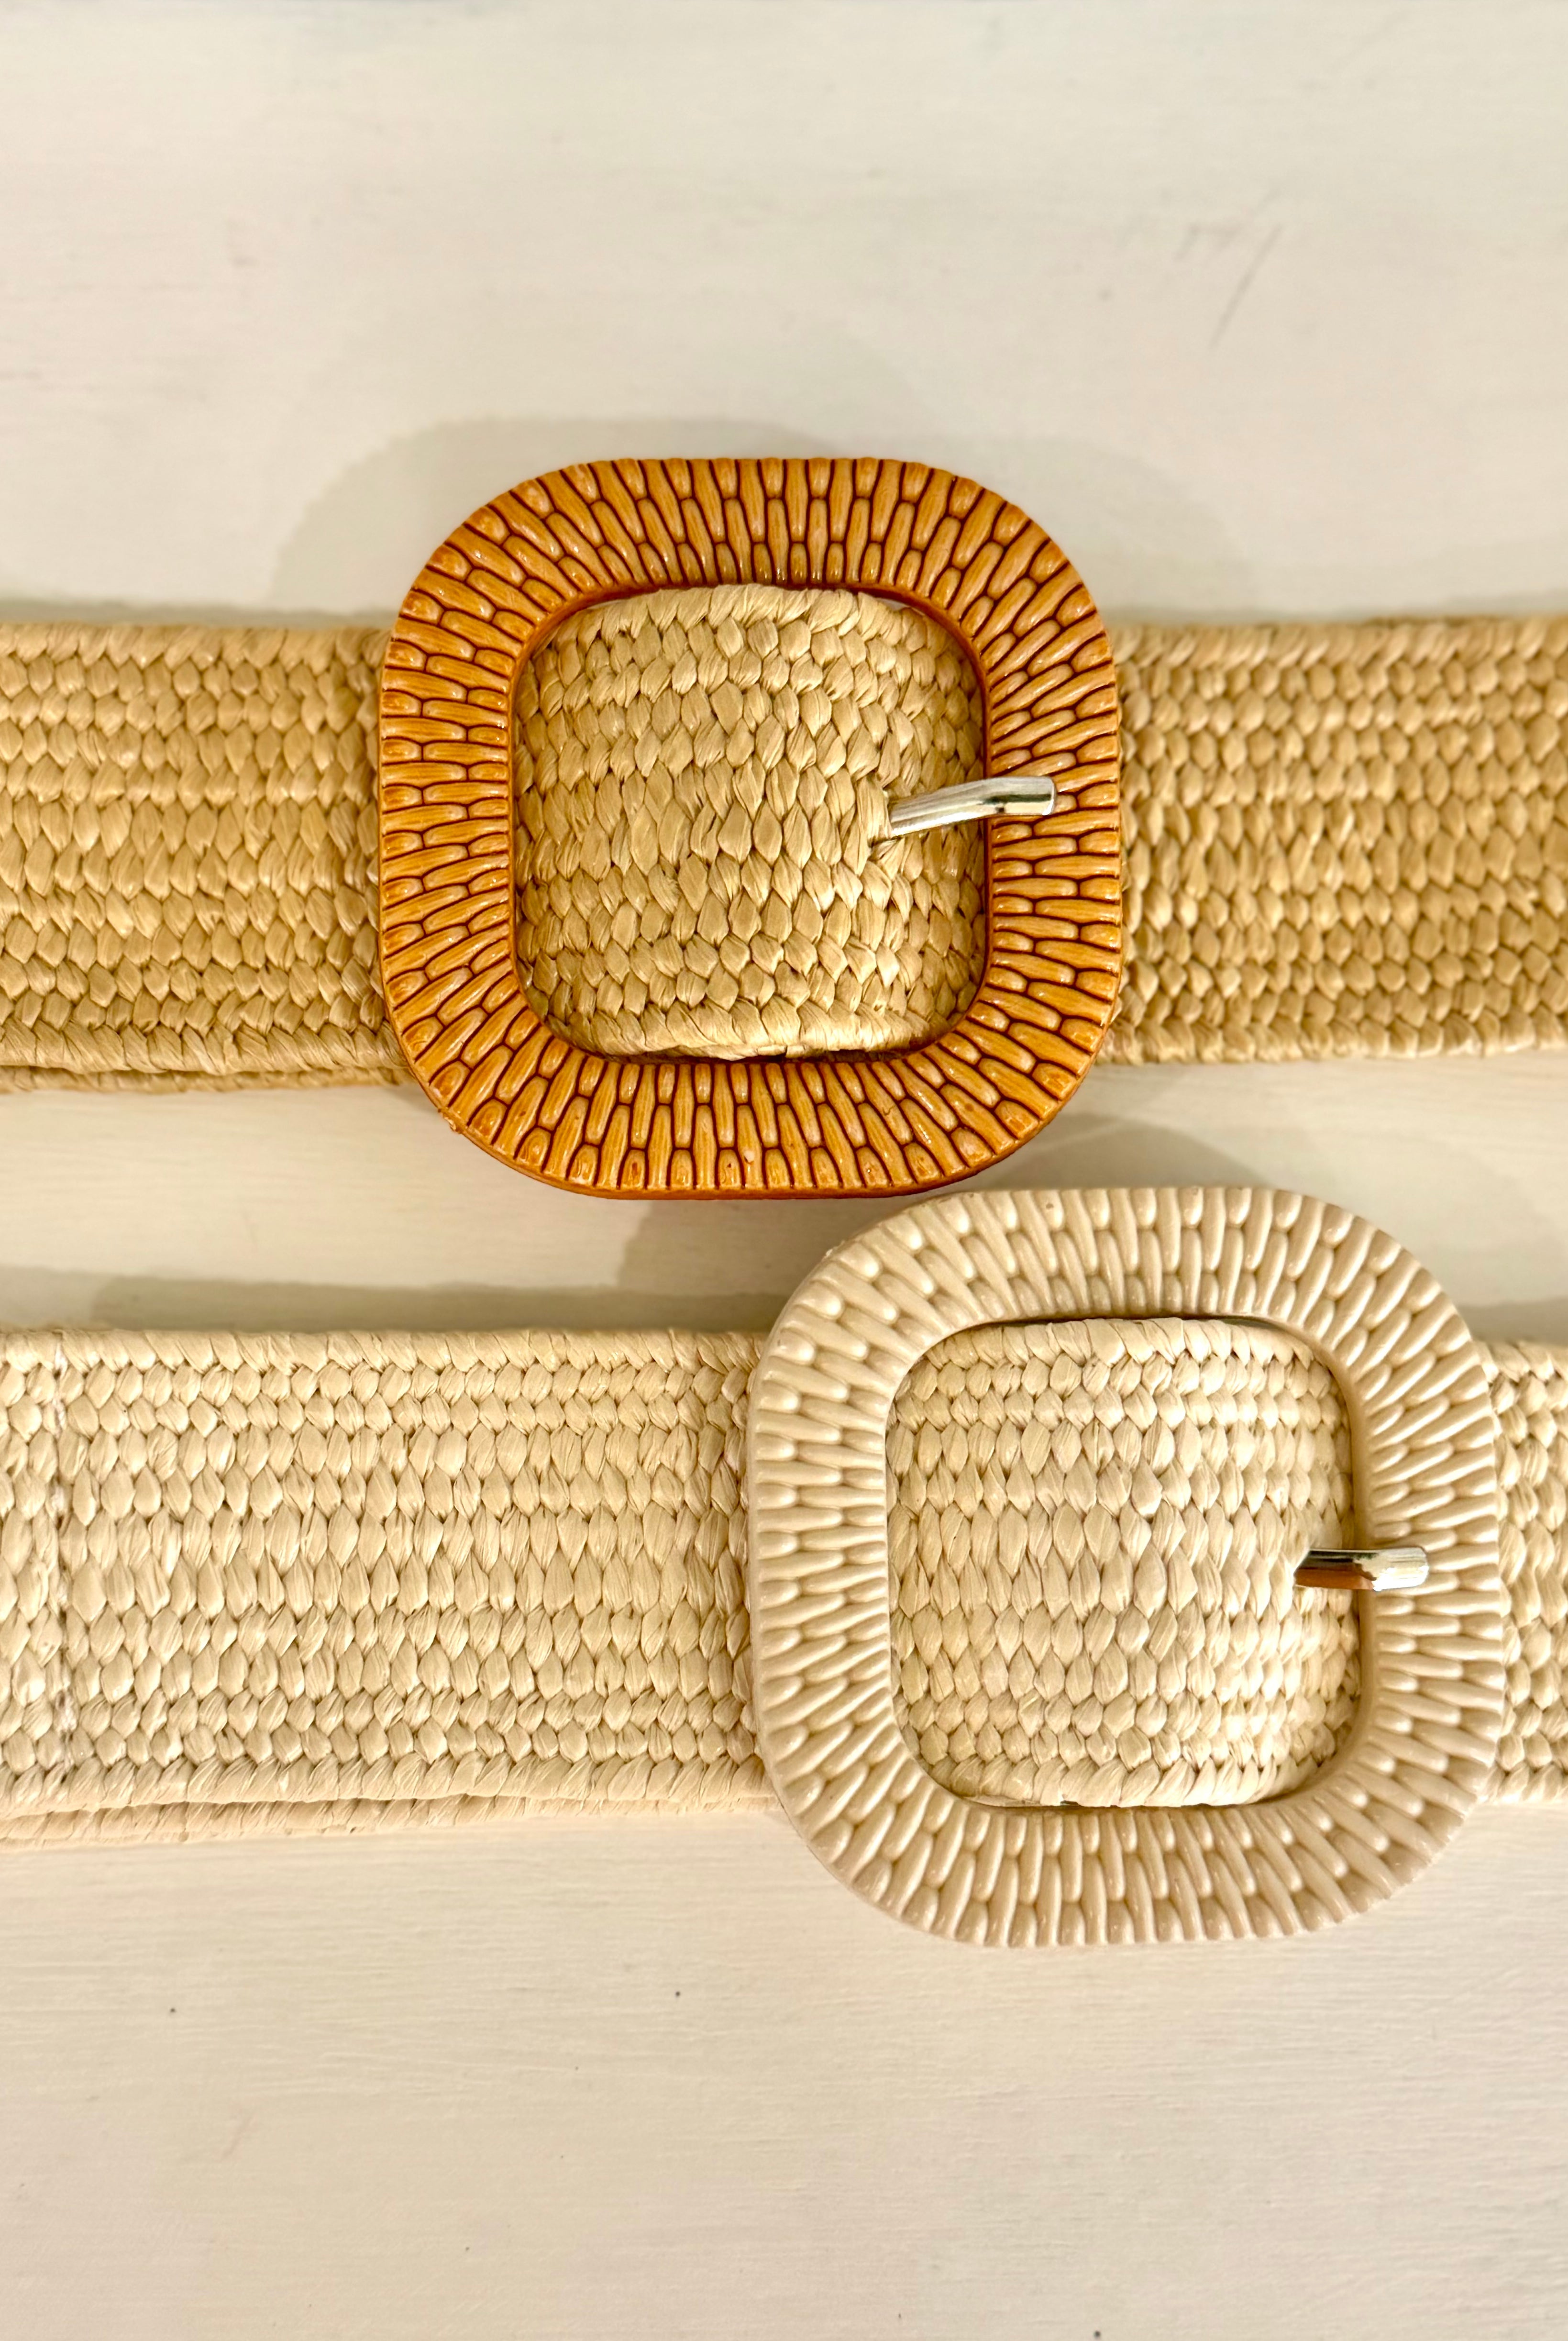 Rattan Belt-280 Accessories-The Lovely Closet-The Lovely Closet, Women's Fashion Boutique in Alexandria, KY